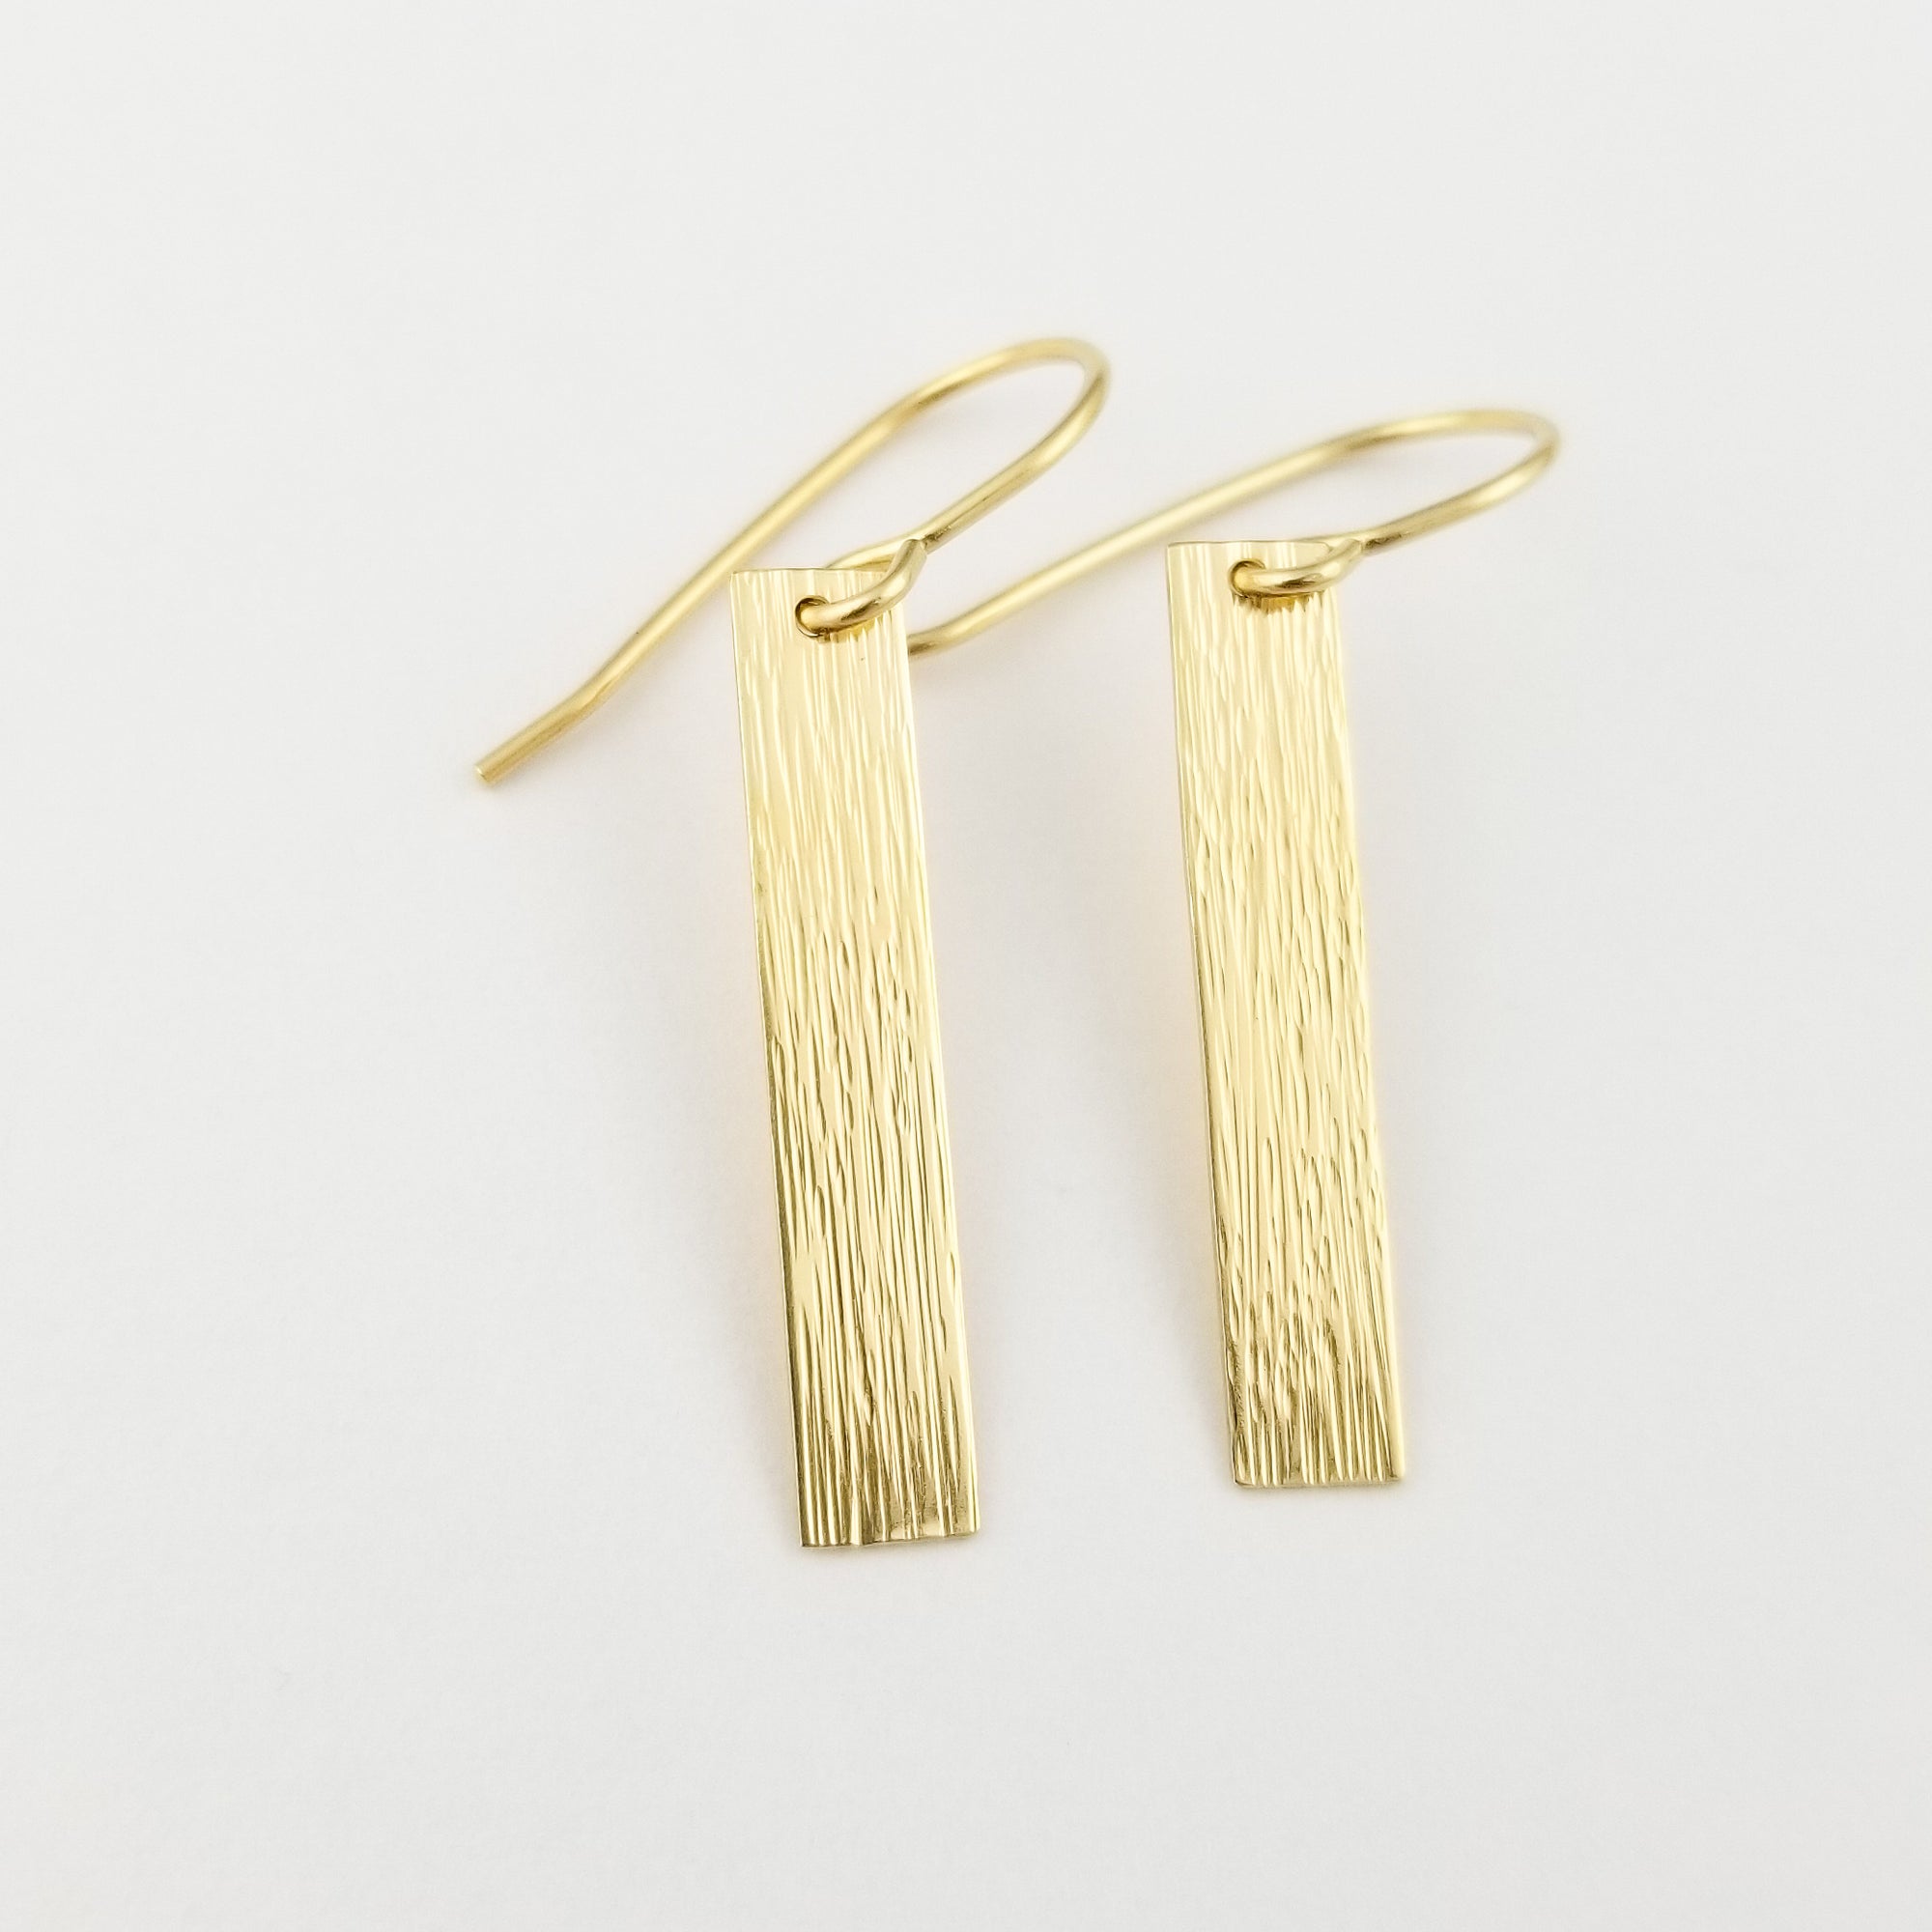 Vertically Hammered Solid 14k Gold Rectangle Earrings